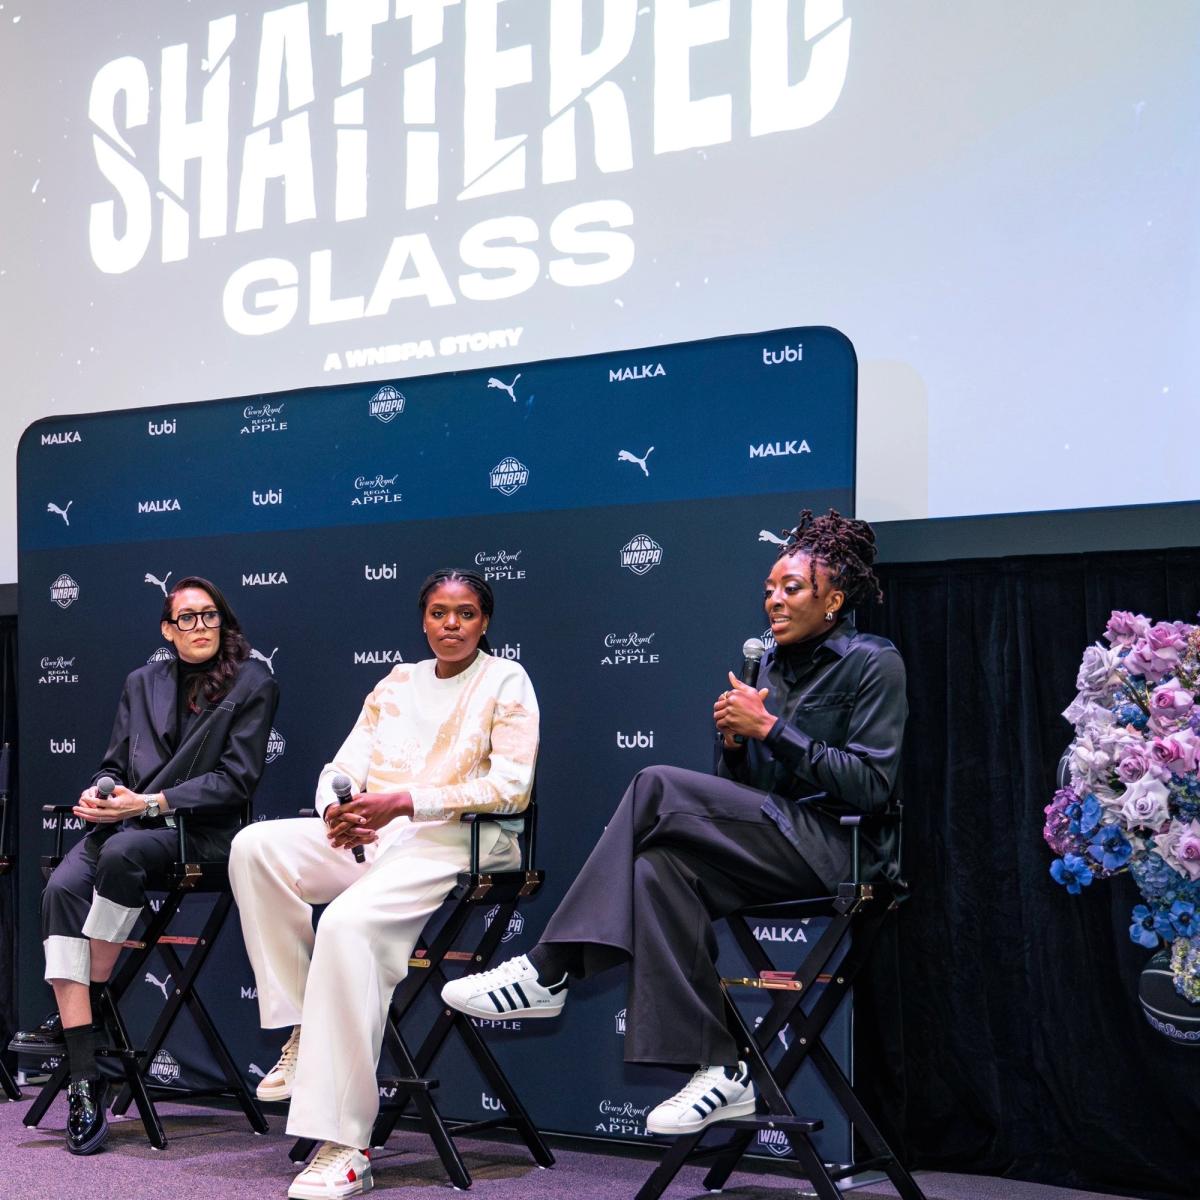 Shattered Glass: A WNBPA Story premieres on free streaming service Tubi